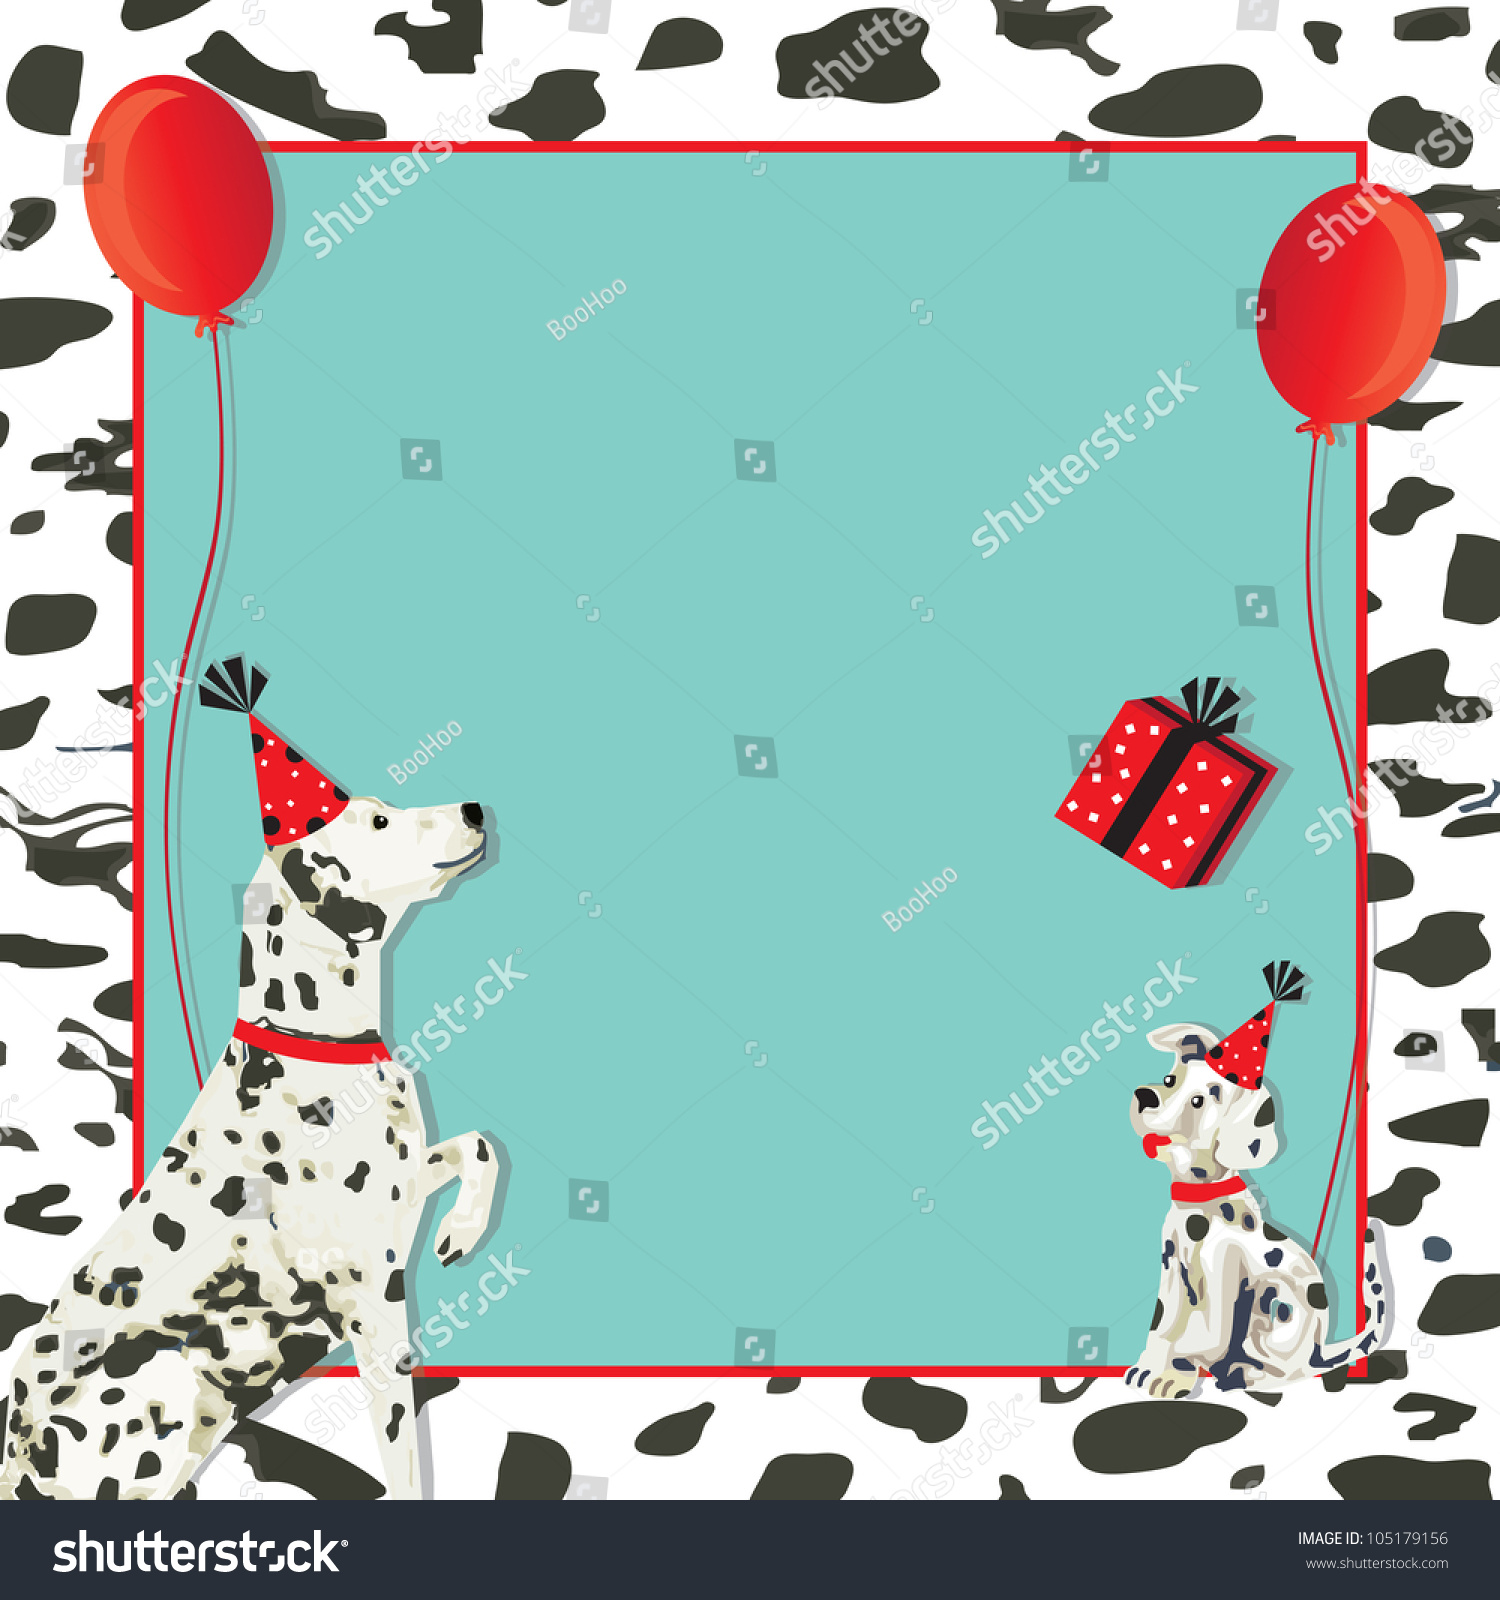 SVG of Dalmatian dog invitation and puppy dog with party hats, gift and red balloons on a spotted dalmation black and white background. svg